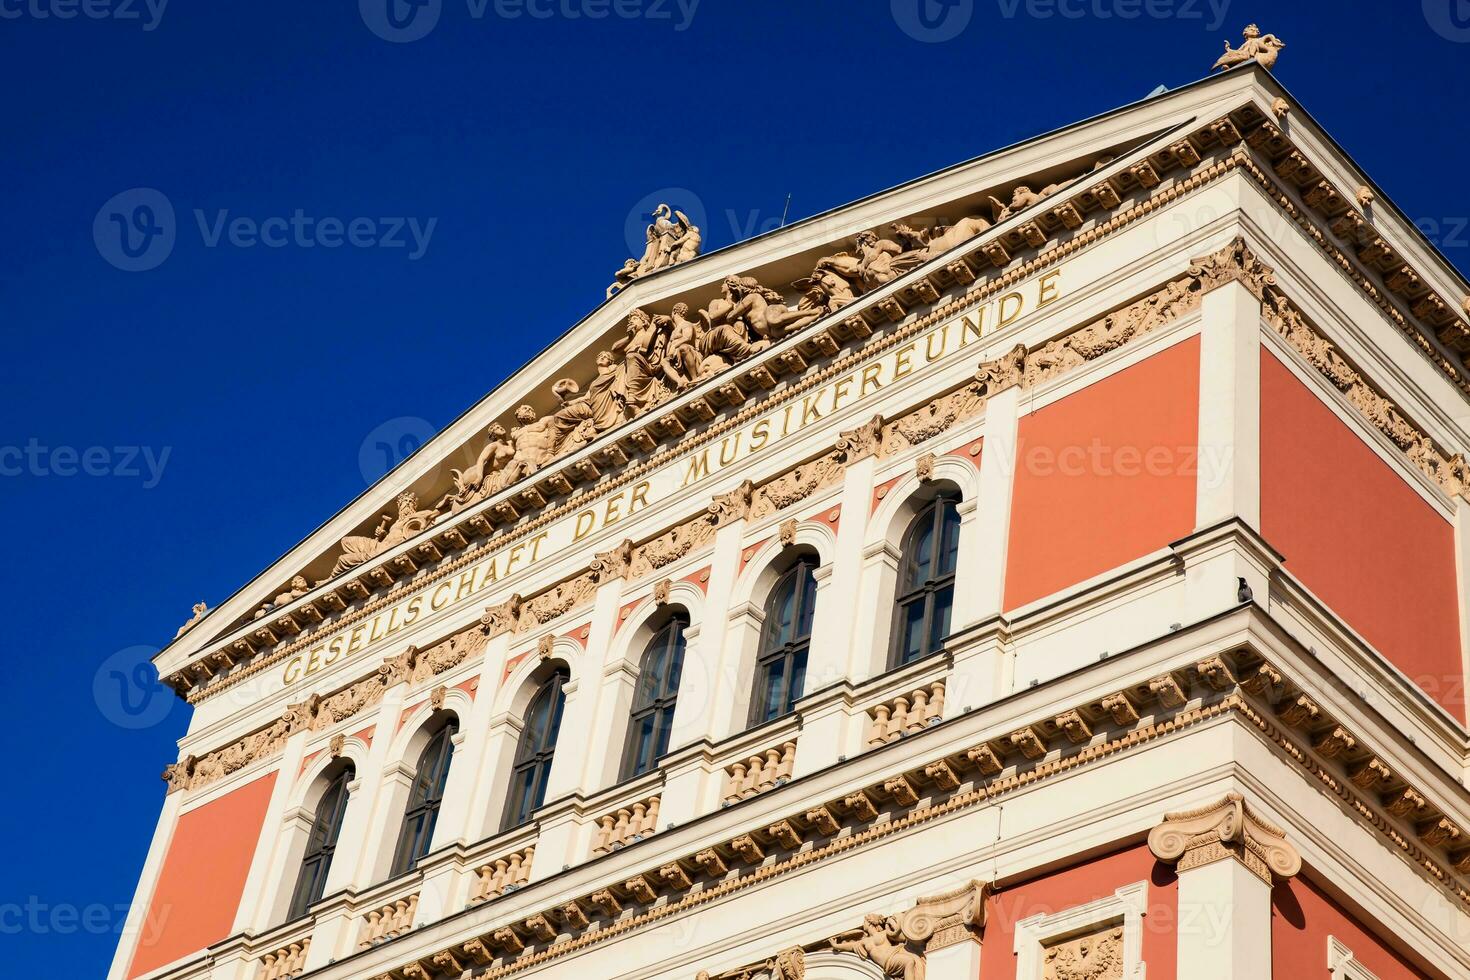 The historic building of the Wiener Musikverein inaugurated on January of 1870 photo